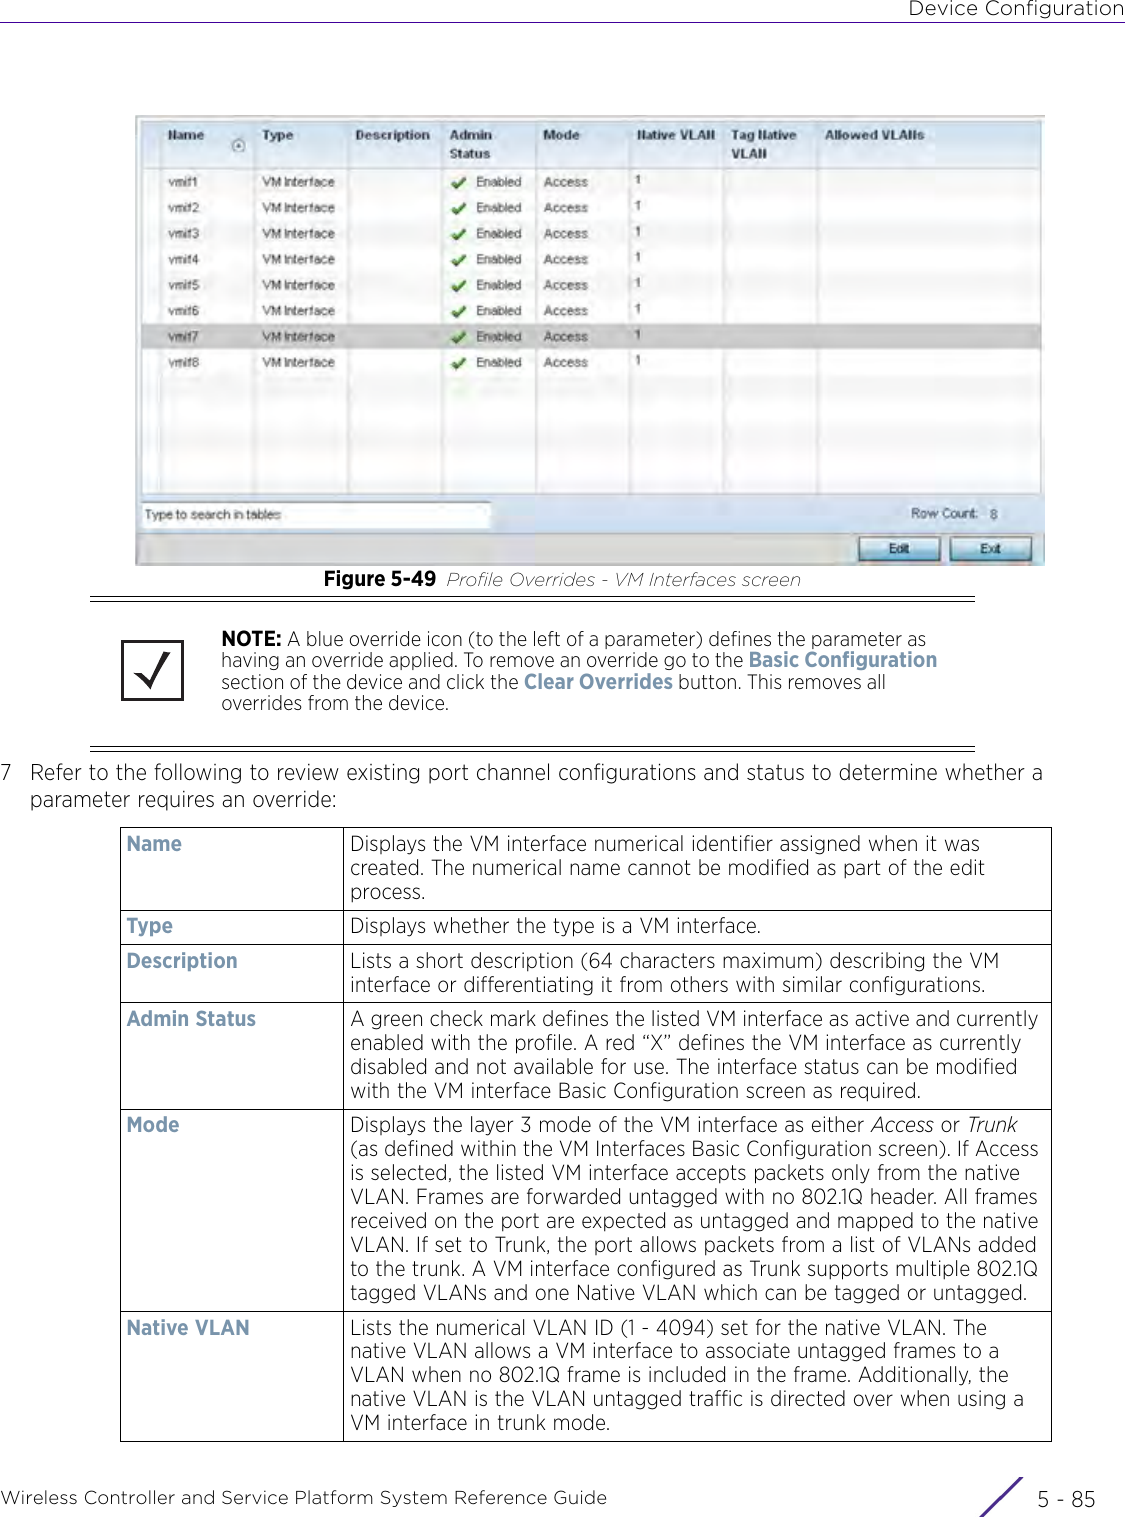 Device ConfigurationWireless Controller and Service Platform System Reference Guide 5 - 85Figure 5-49 Profile Overrides - VM Interfaces screen7 Refer to the following to review existing port channel configurations and status to determine whether a parameter requires an override:NOTE: A blue override icon (to the left of a parameter) defines the parameter as having an override applied. To remove an override go to the Basic Configuration section of the device and click the Clear Overrides button. This removes all overrides from the device.Name Displays the VM interface numerical identifier assigned when it was created. The numerical name cannot be modified as part of the edit process. Type Displays whether the type is a VM interface.Description Lists a short description (64 characters maximum) describing the VM interface or differentiating it from others with similar configurations. Admin Status A green check mark defines the listed VM interface as active and currently enabled with the profile. A red “X” defines the VM interface as currently disabled and not available for use. The interface status can be modified with the VM interface Basic Configuration screen as required.Mode Displays the layer 3 mode of the VM interface as either Access or Trunk (as defined within the VM Interfaces Basic Configuration screen). If Access is selected, the listed VM interface accepts packets only from the native VLAN. Frames are forwarded untagged with no 802.1Q header. All frames received on the port are expected as untagged and mapped to the native VLAN. If set to Trunk, the port allows packets from a list of VLANs added to the trunk. A VM interface configured as Trunk supports multiple 802.1Q tagged VLANs and one Native VLAN which can be tagged or untagged. Native VLAN Lists the numerical VLAN ID (1 - 4094) set for the native VLAN. The native VLAN allows a VM interface to associate untagged frames to a VLAN when no 802.1Q frame is included in the frame. Additionally, the native VLAN is the VLAN untagged traffic is directed over when using a VM interface in trunk mode.